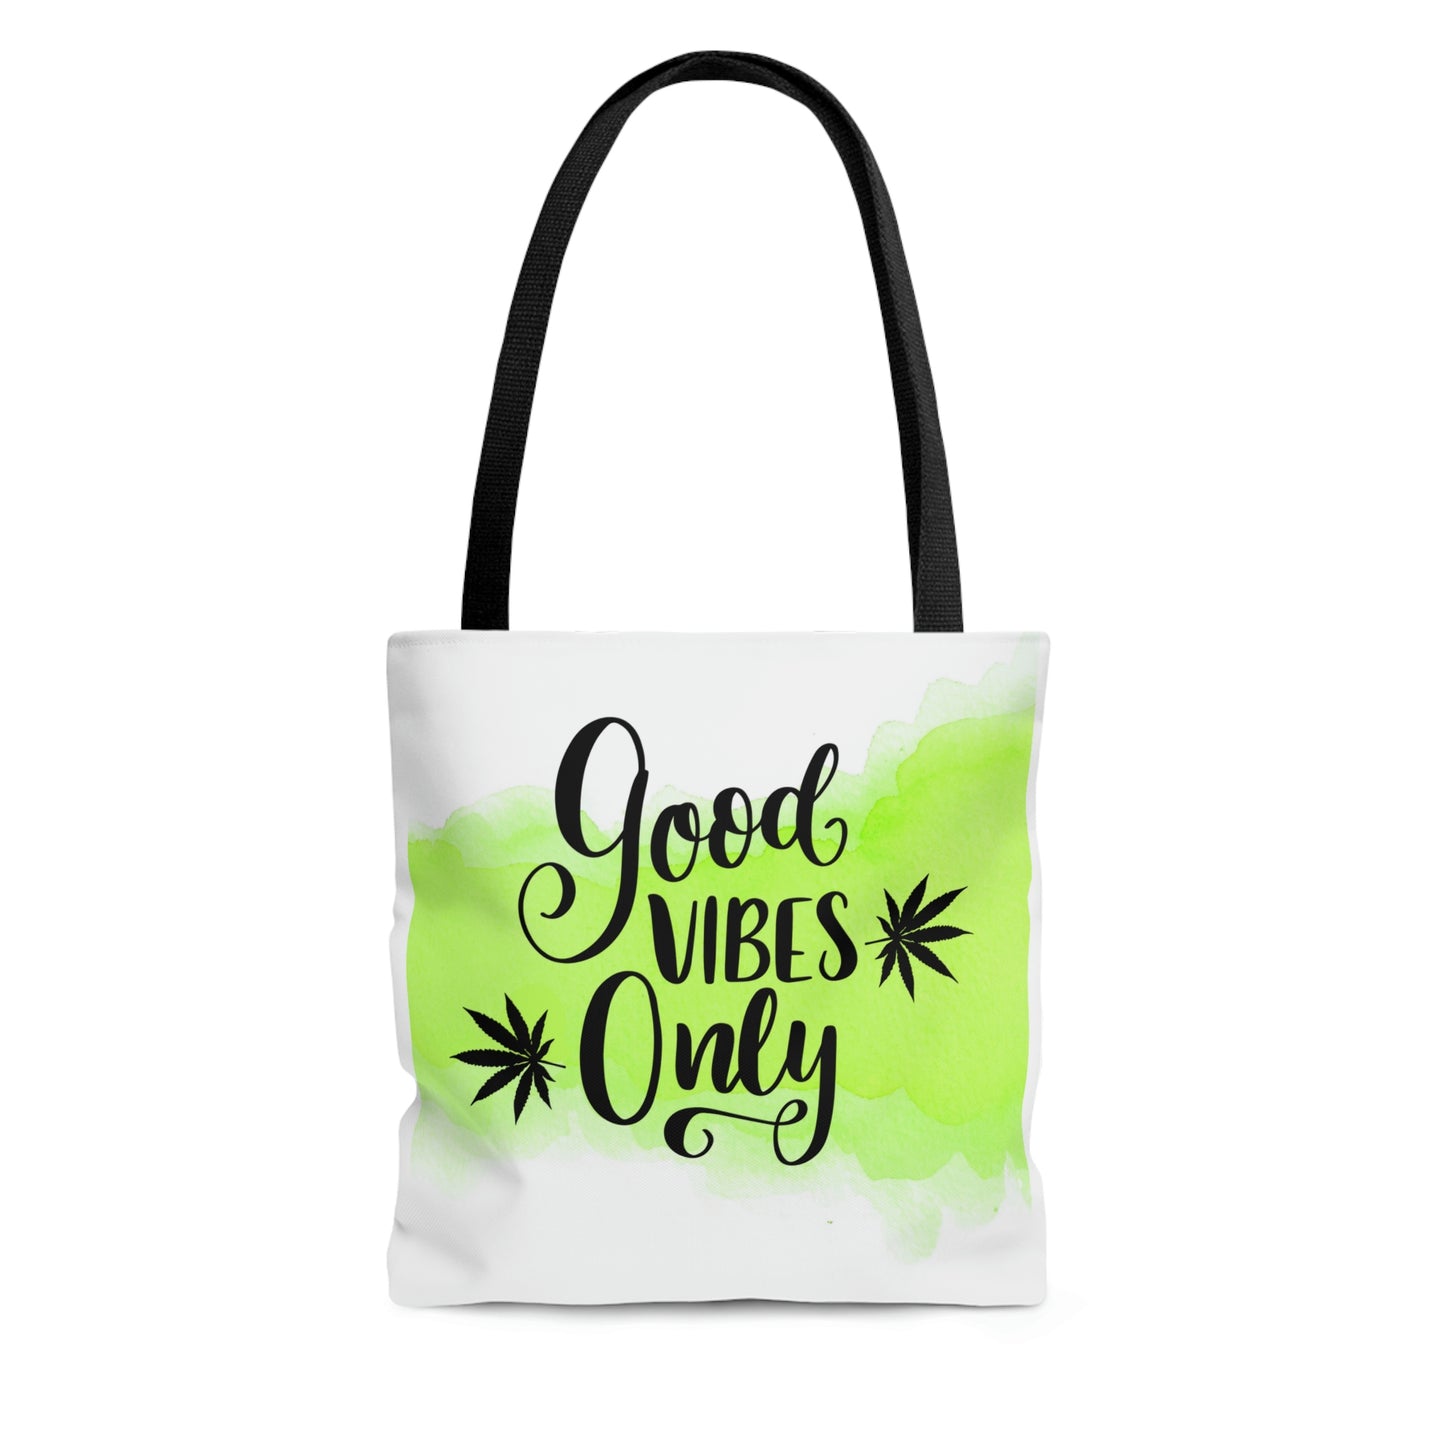 A crispy white and black Good Vibes Only Weed Tote Bag with black straps  